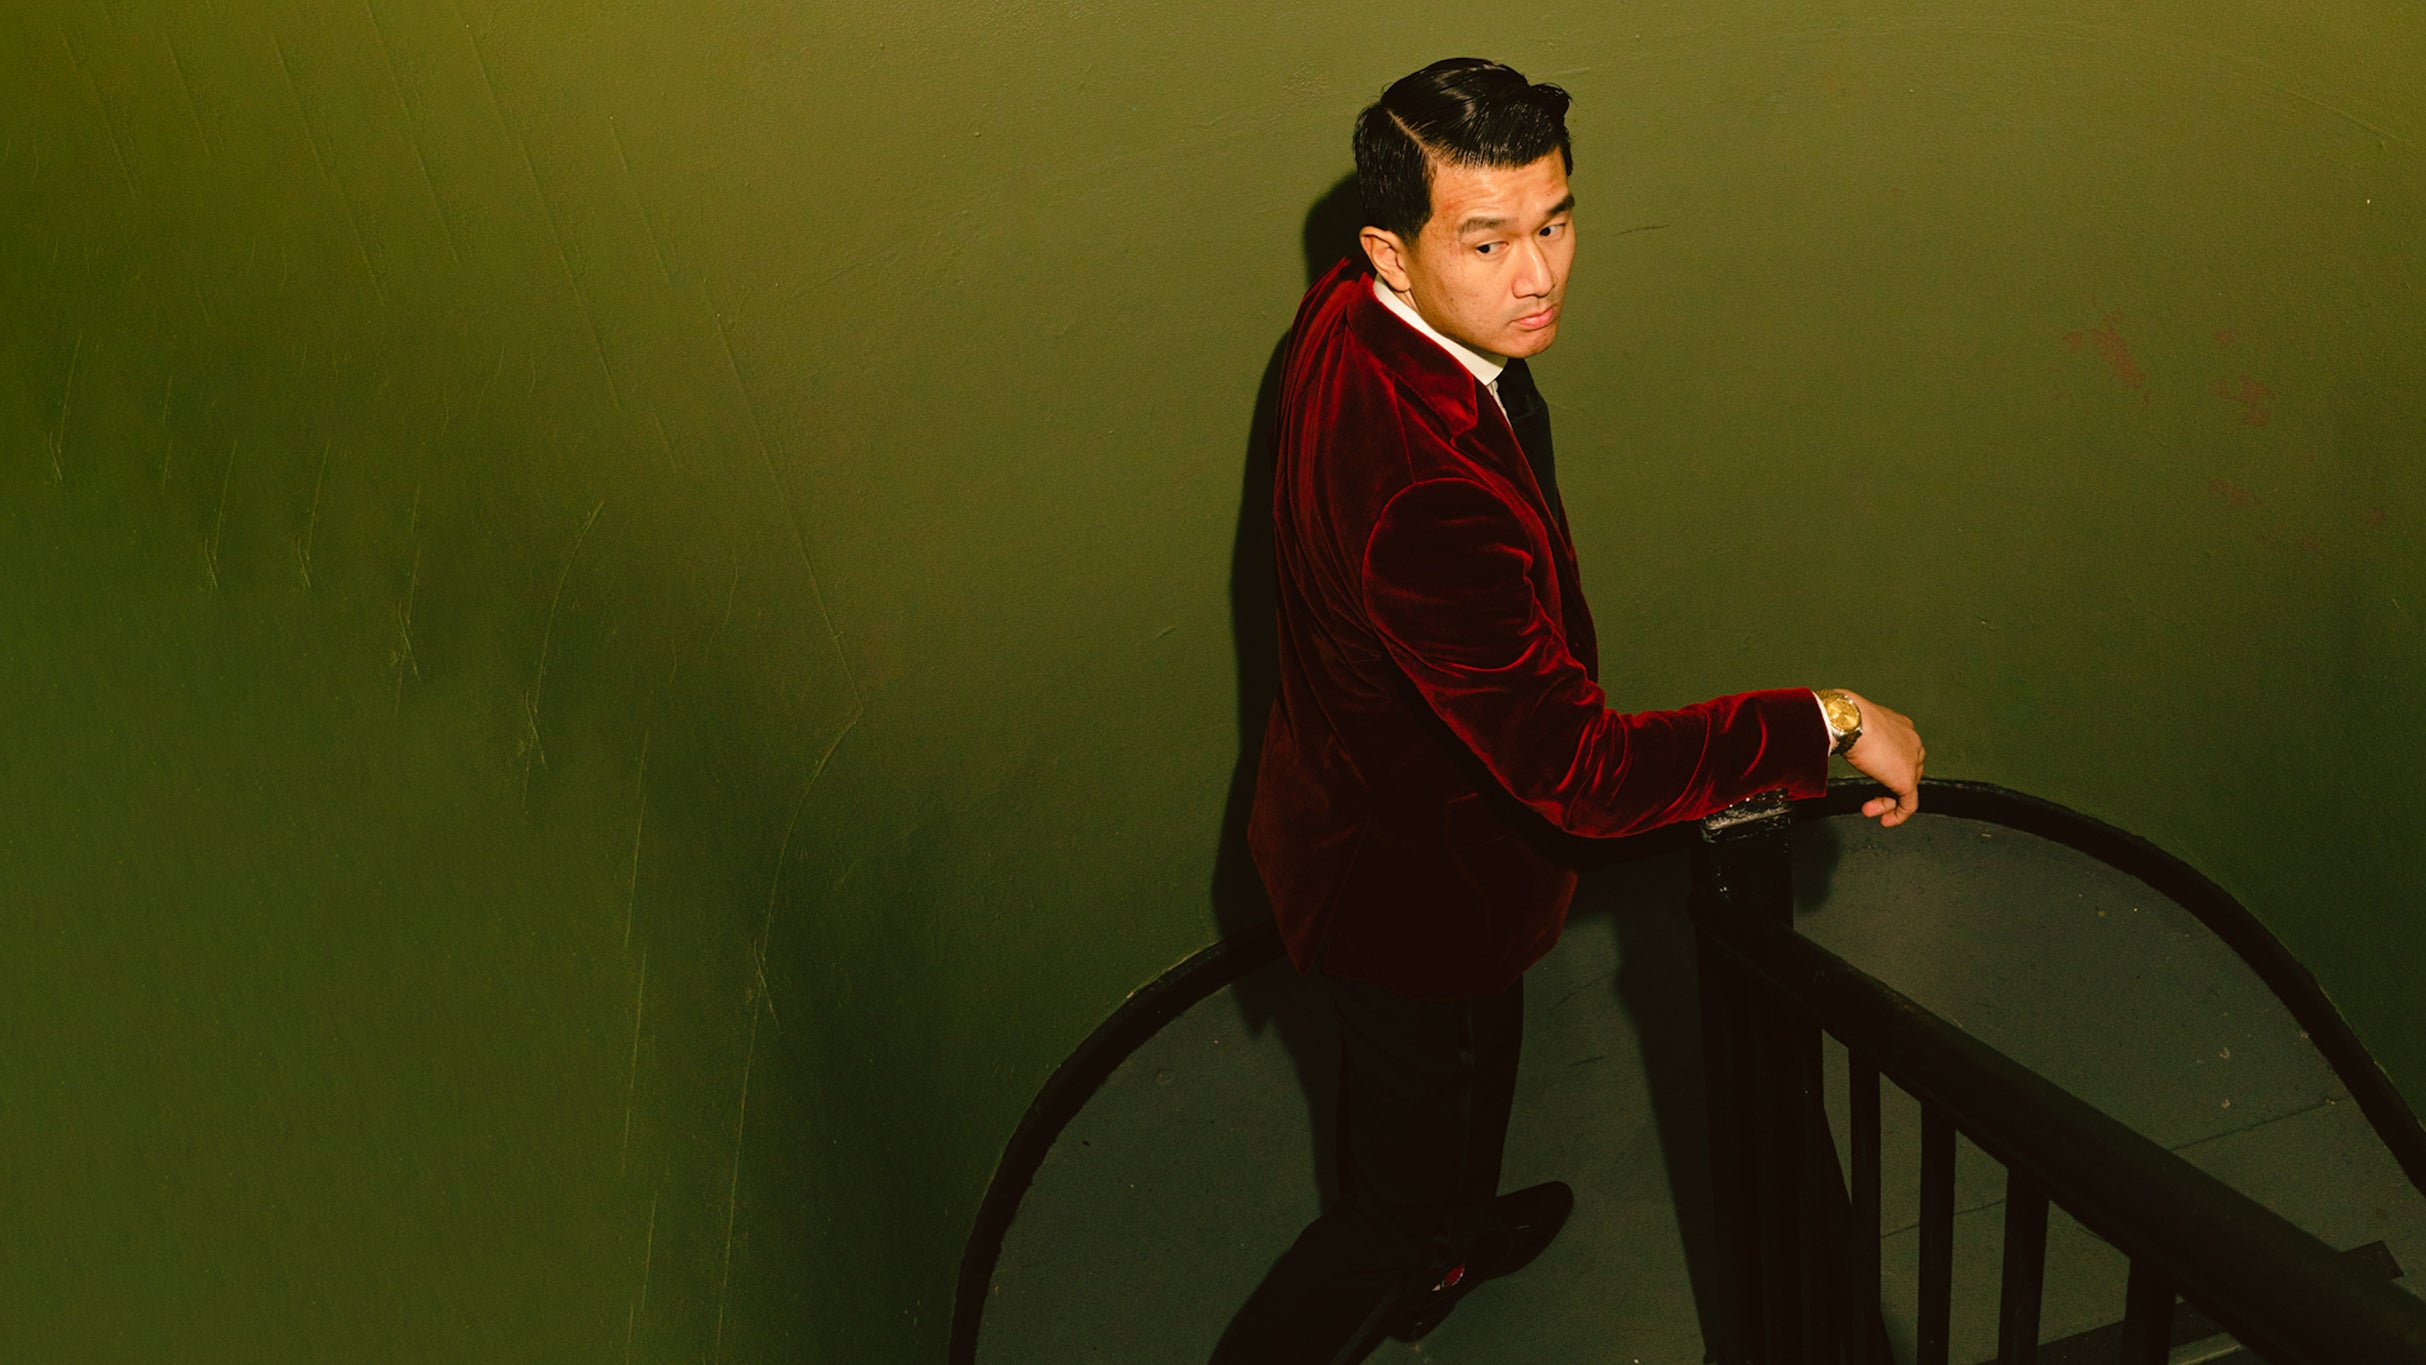 Main image for event titled Ronny Chieng: The Love To Hate It Tour